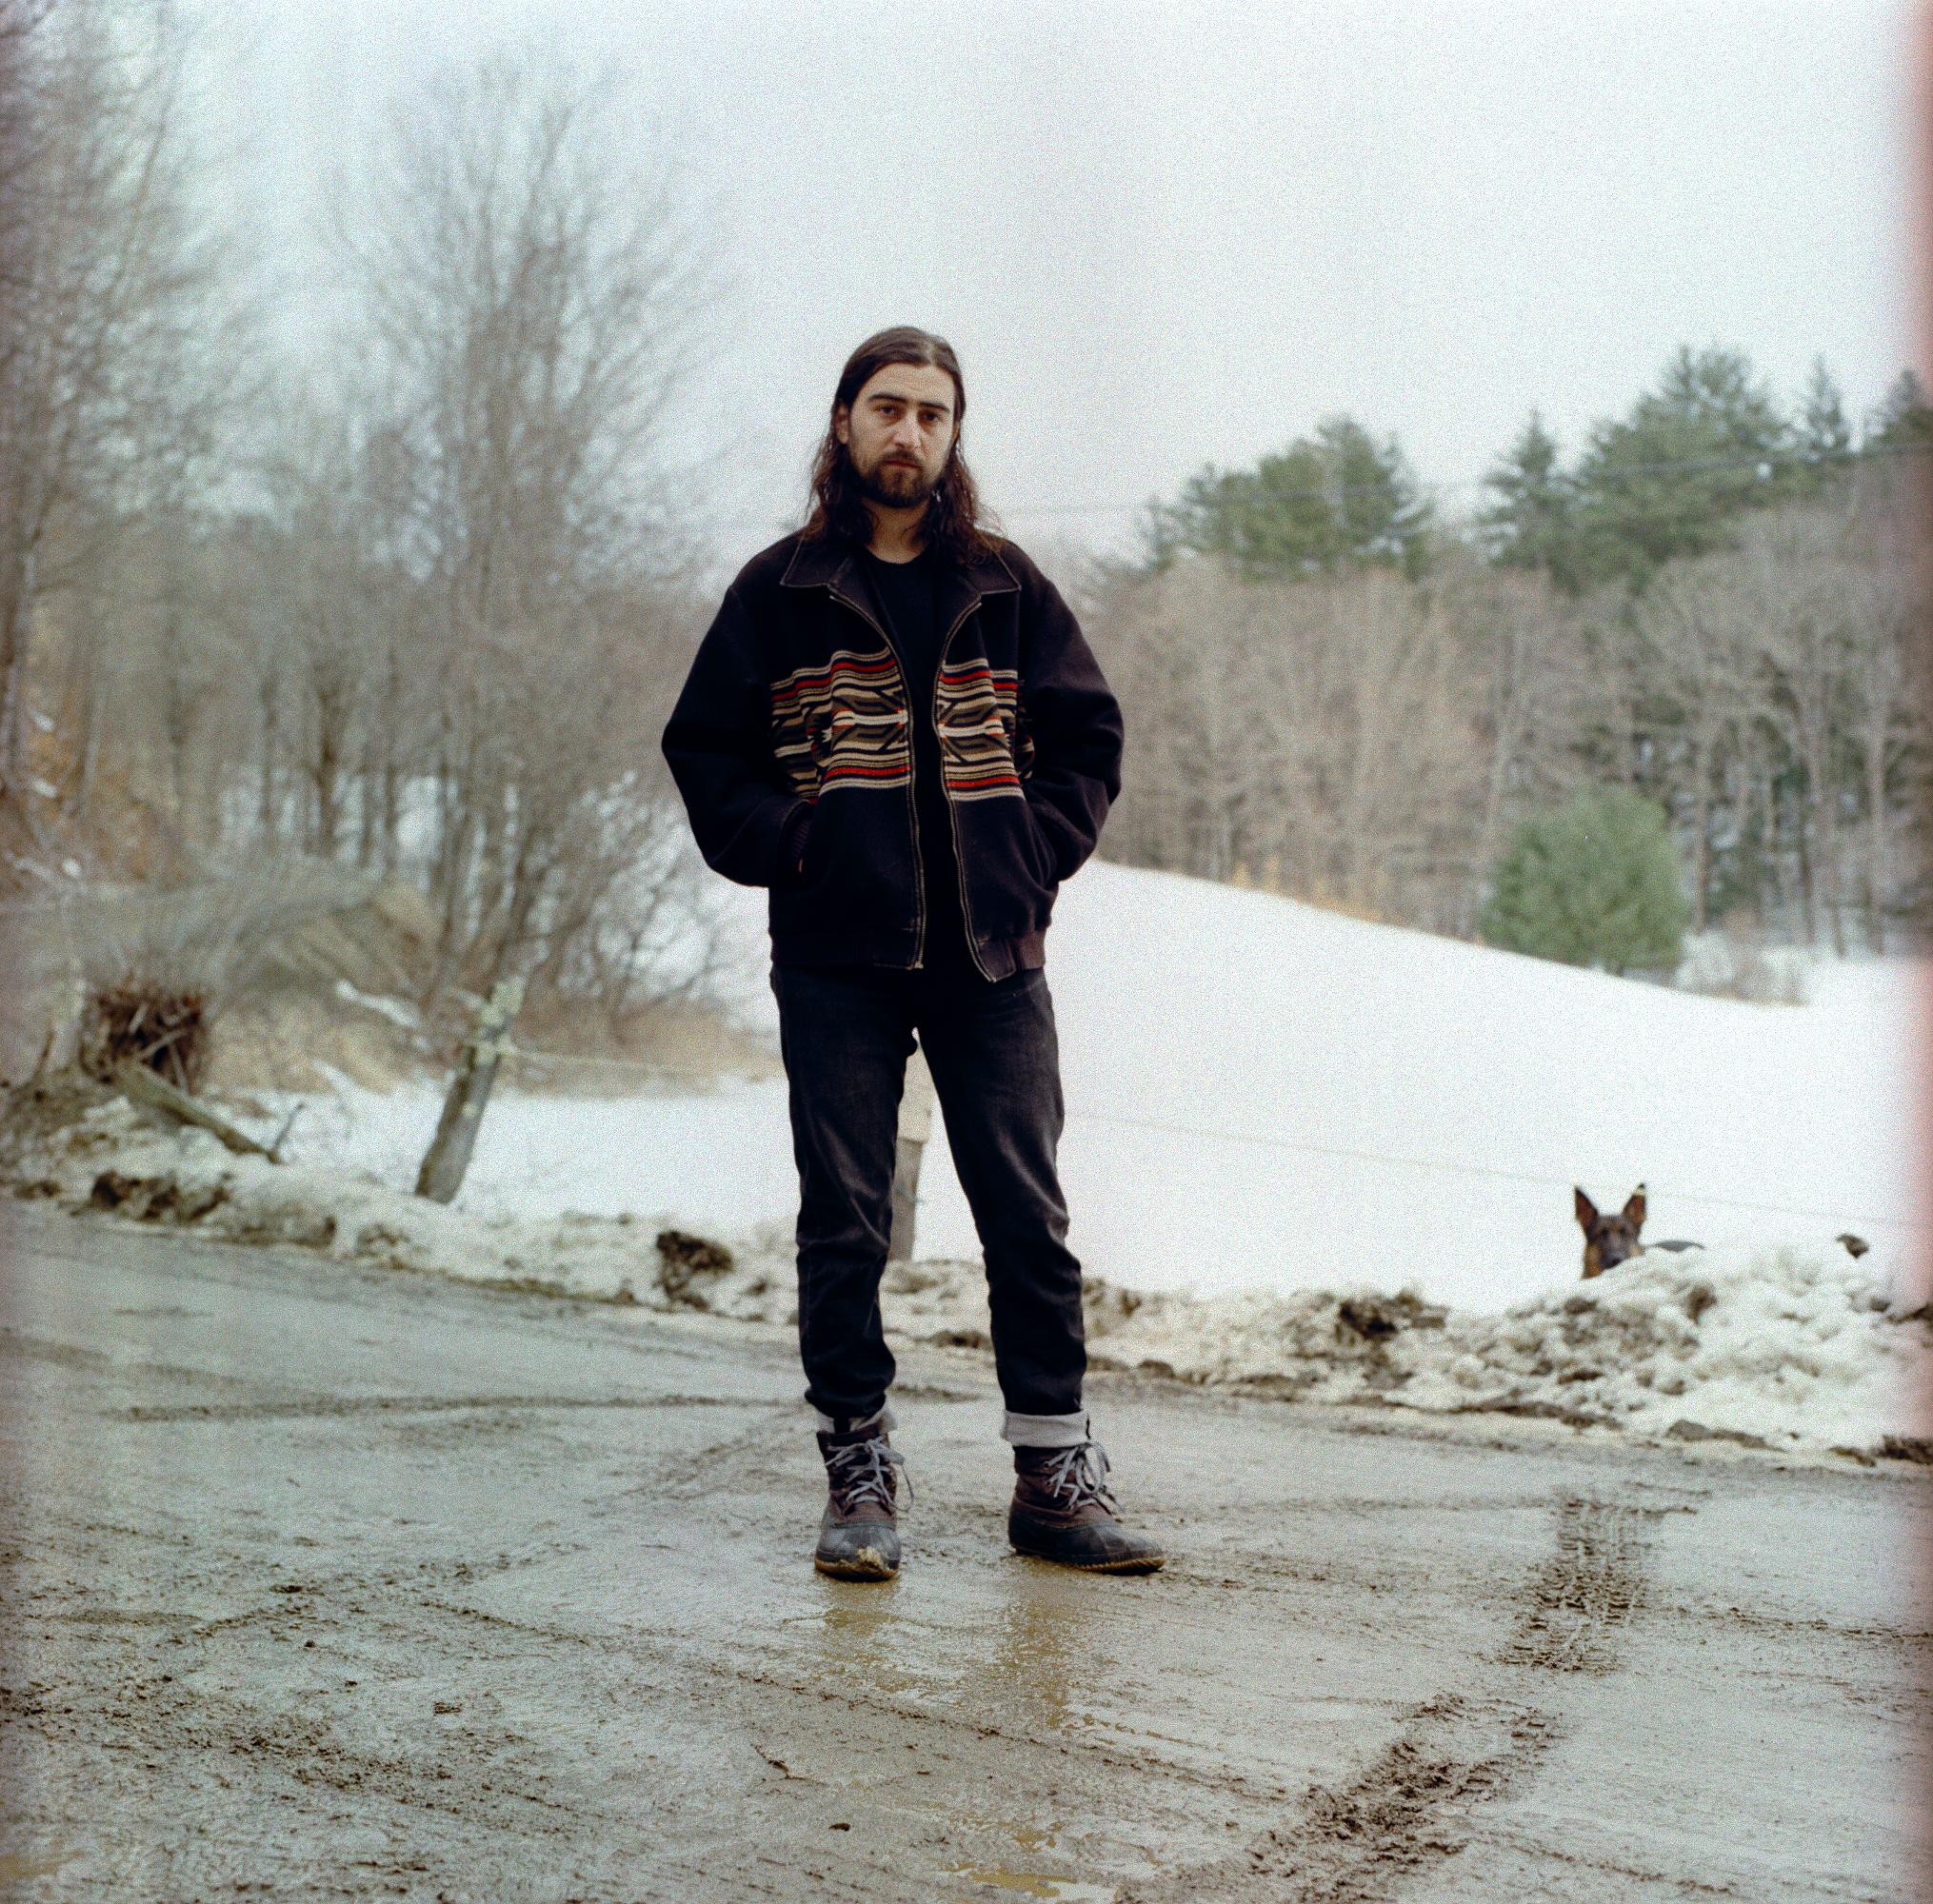 Noah Kahan standing in road with snow behind him and dog peeking head from behind snow pile